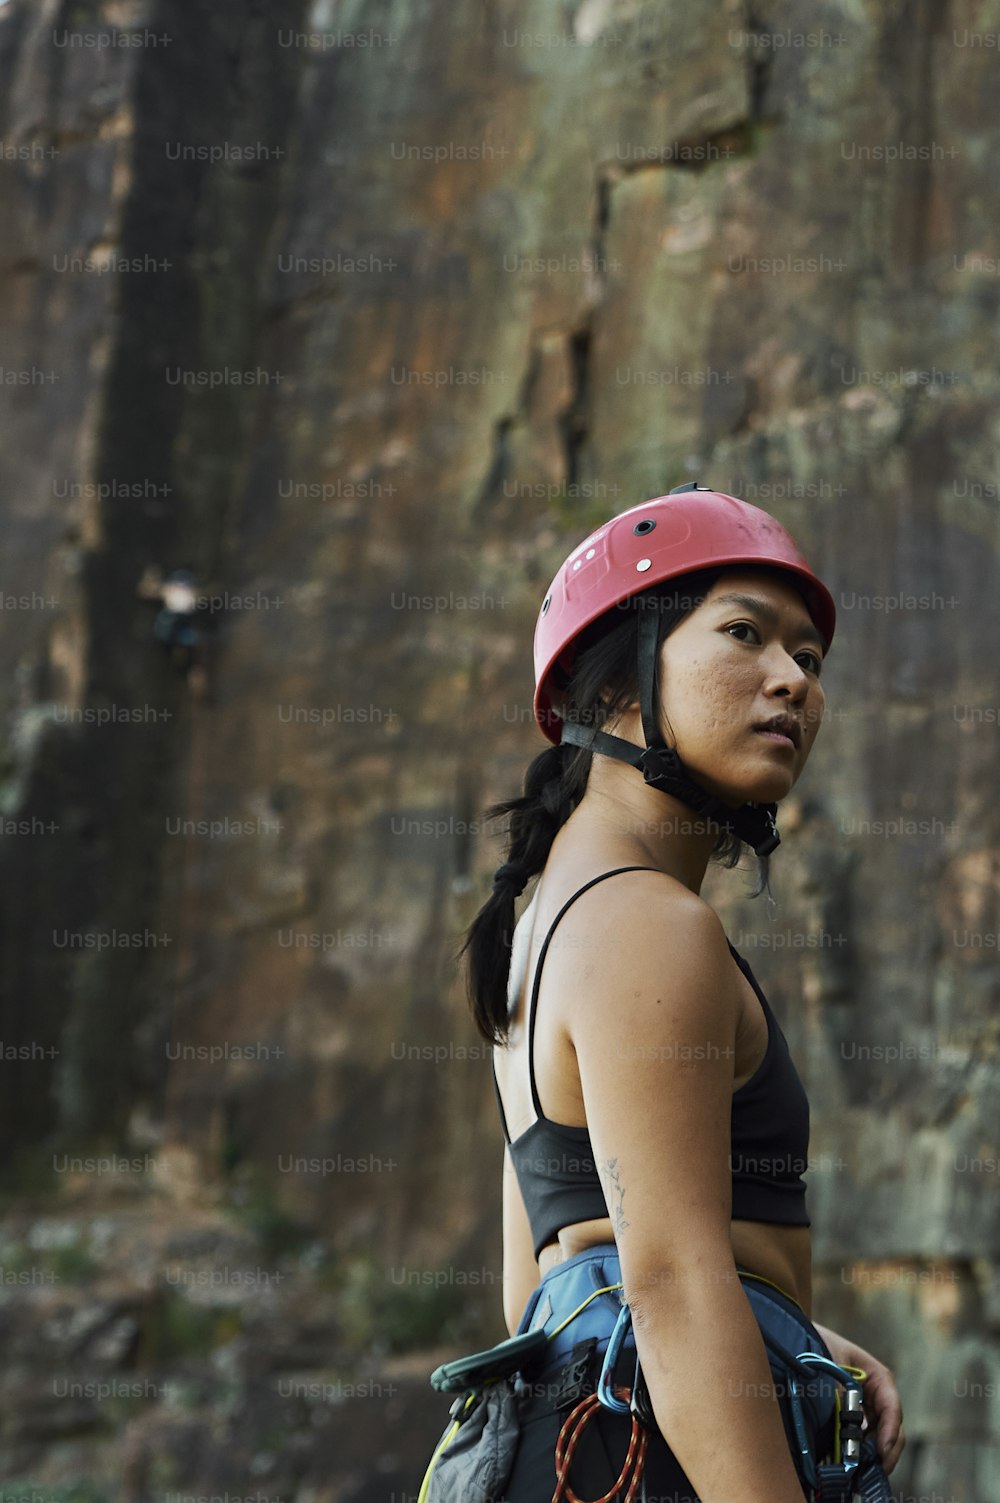 a woman wearing a helmet standing in front of a rock face